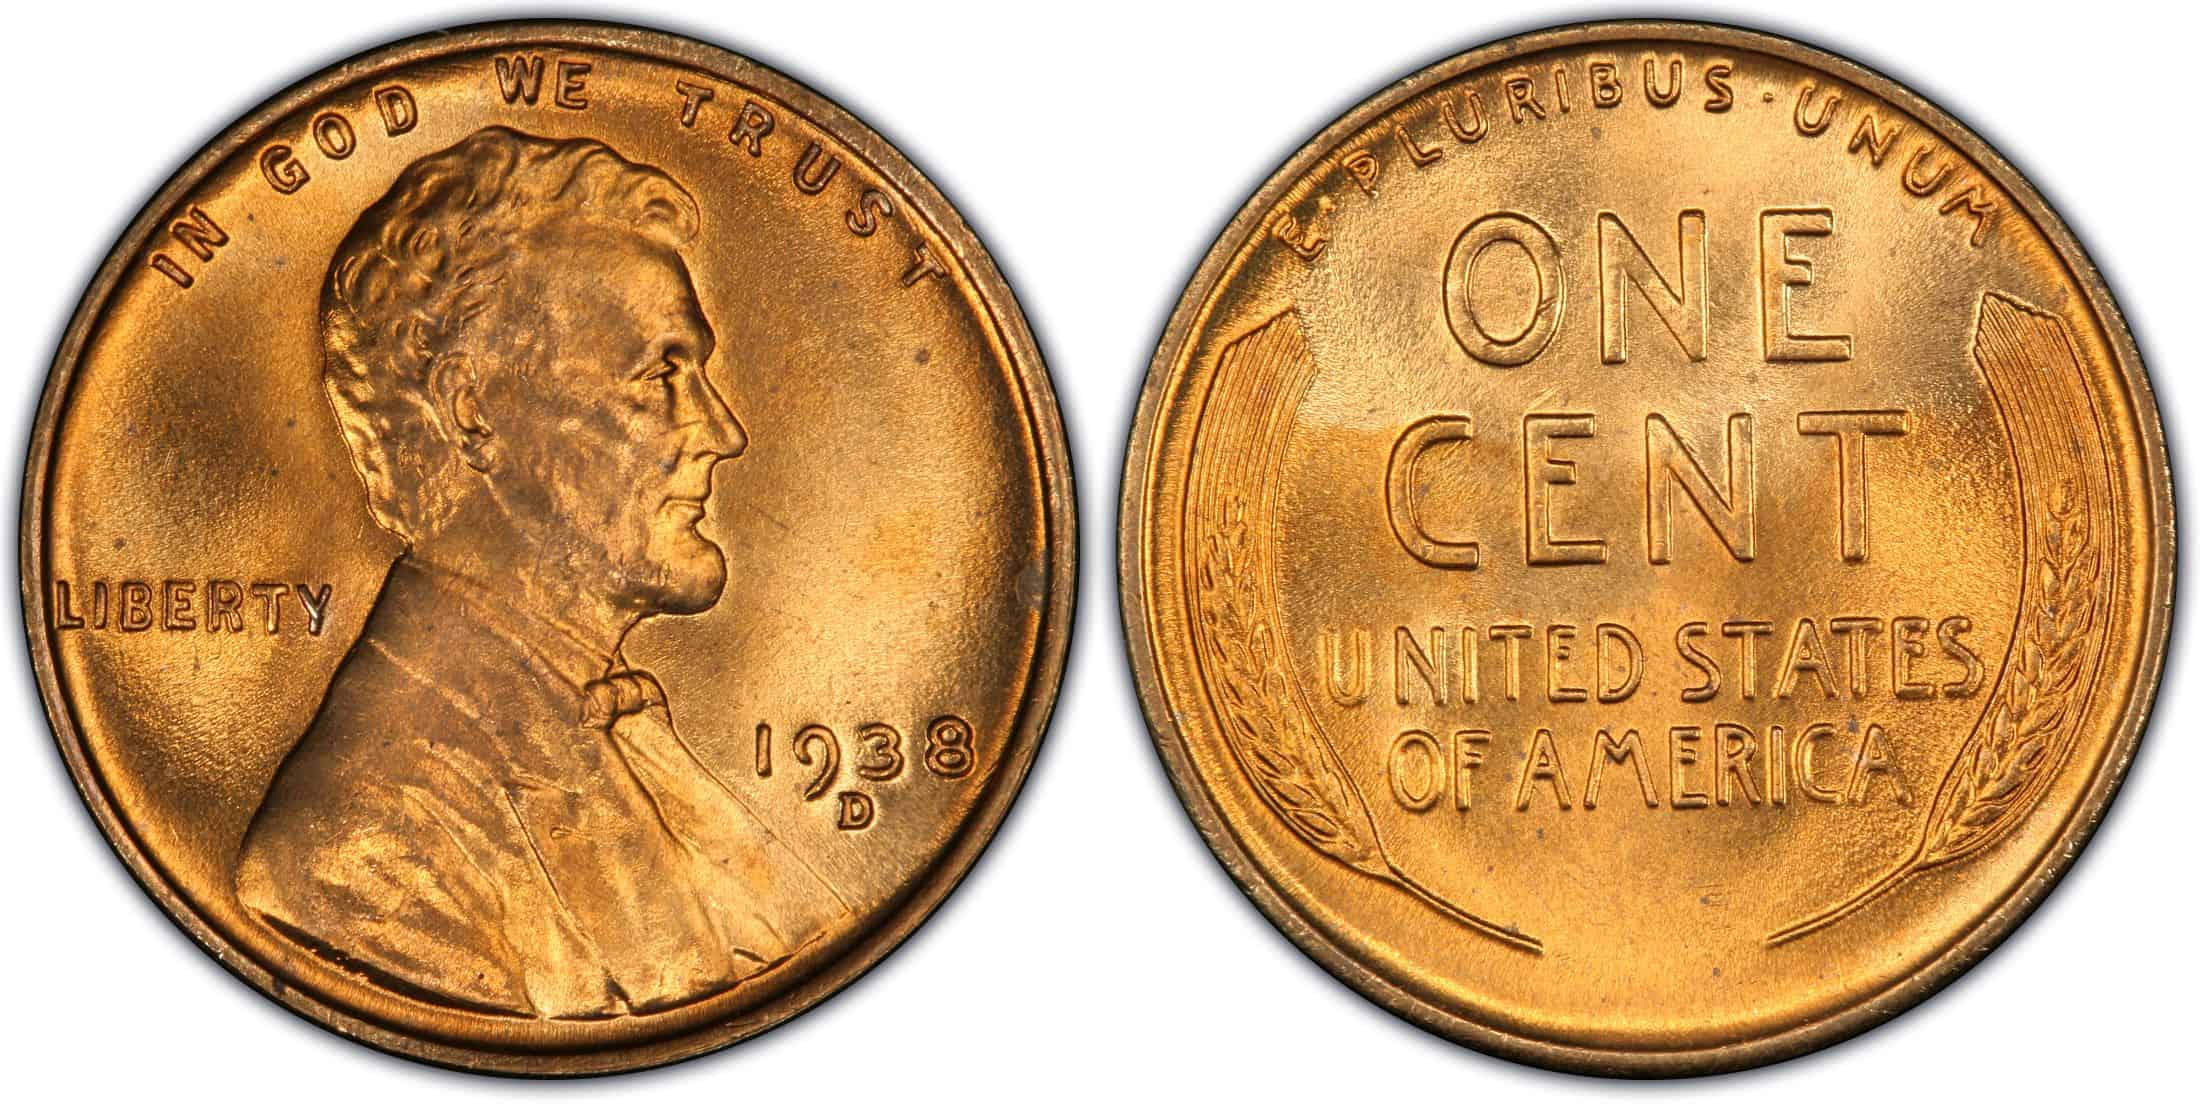 1938 D Penny Value